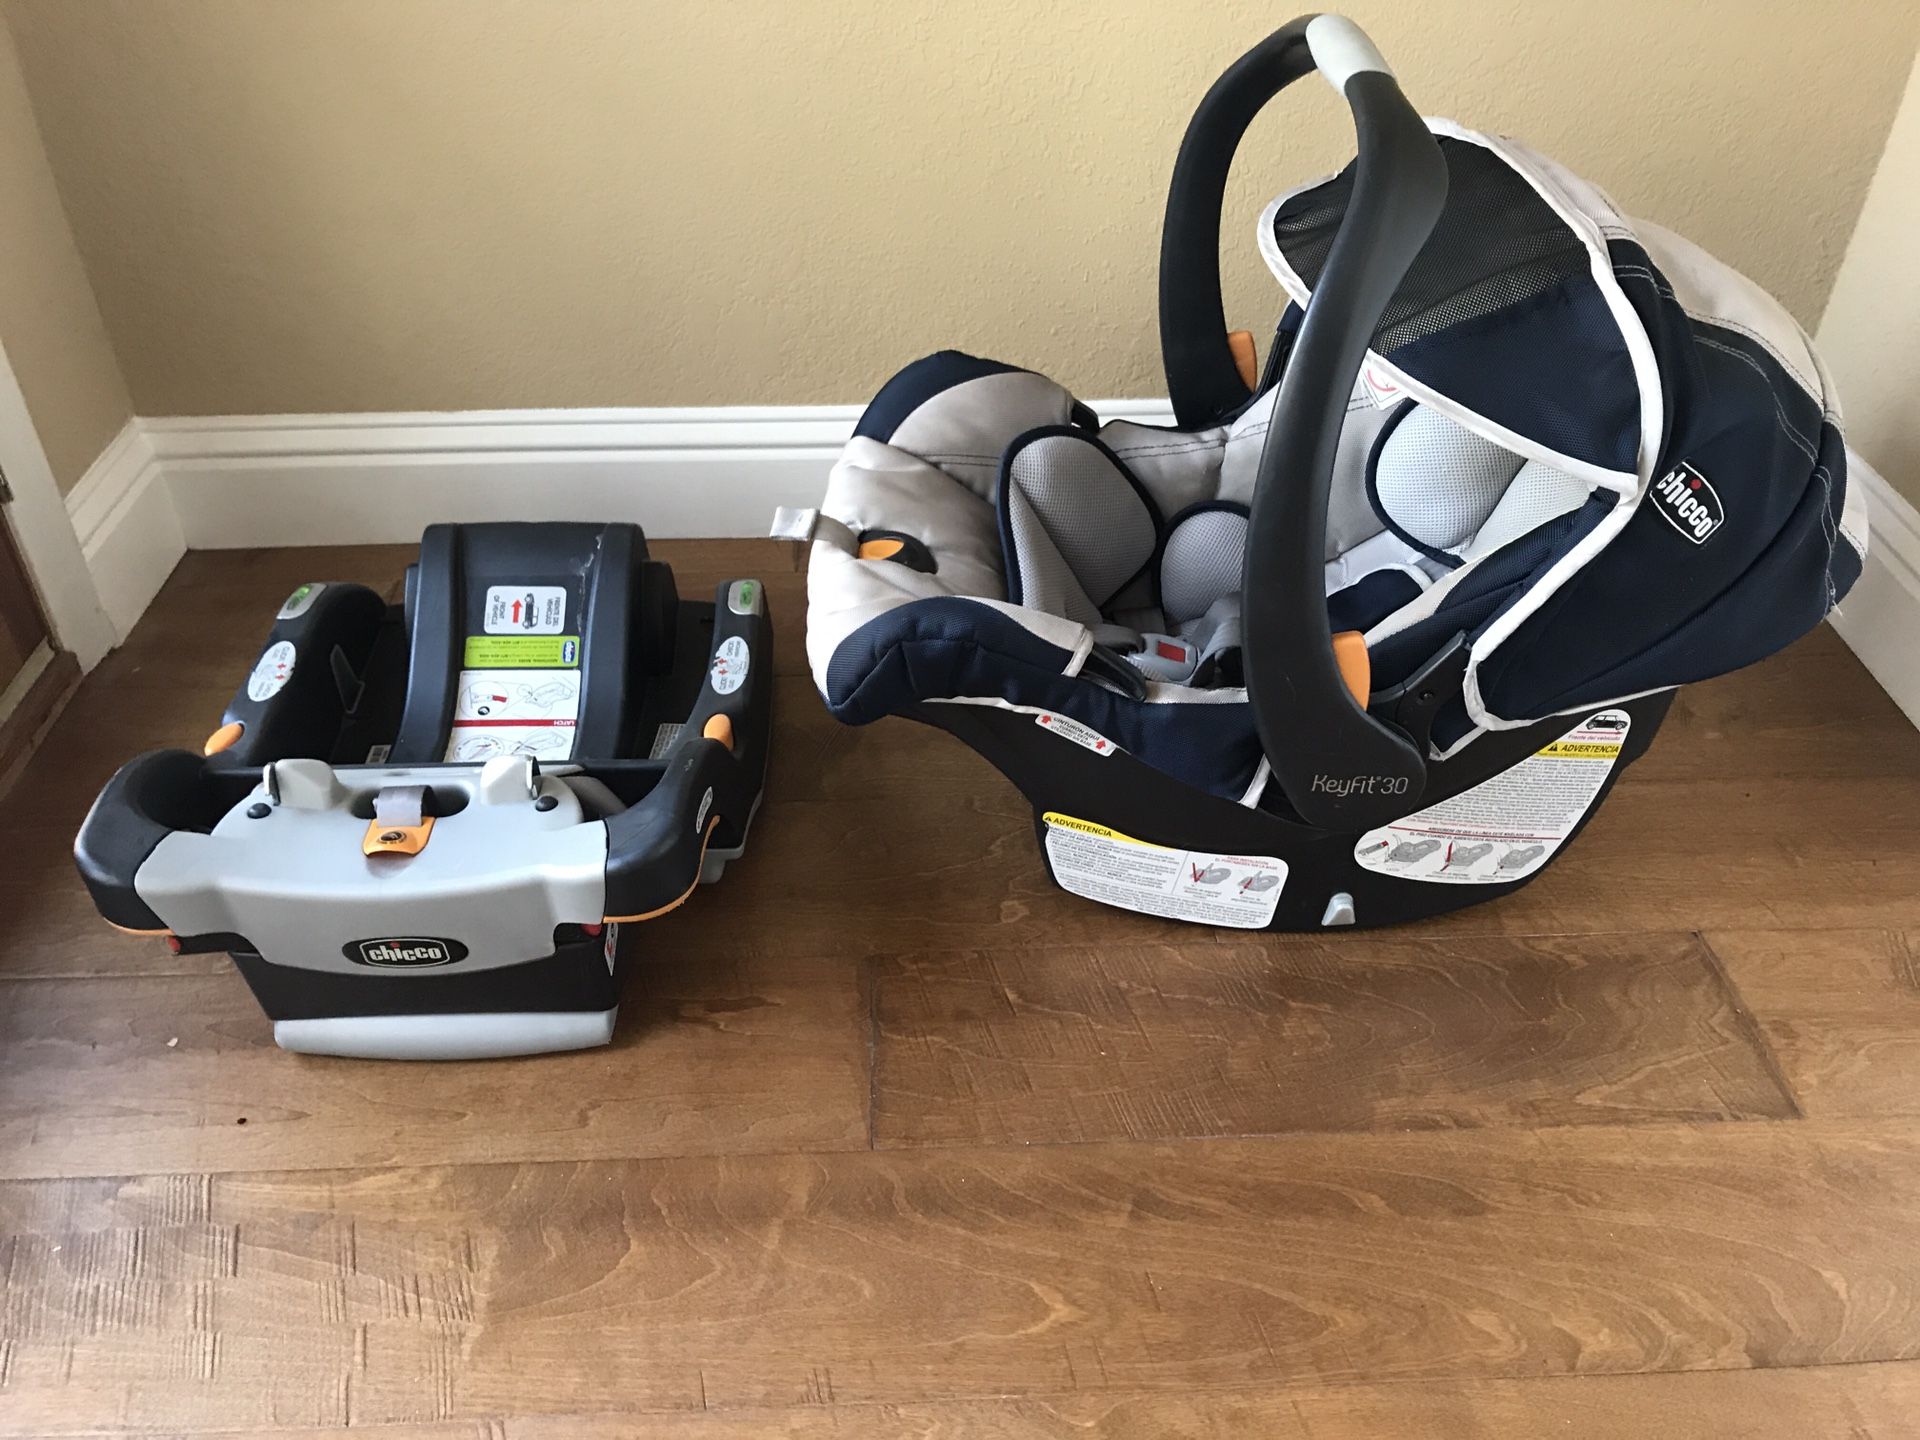 Chicco keyfit 30 infant car seat in good condition. This is a highly rated car seat one of the best available